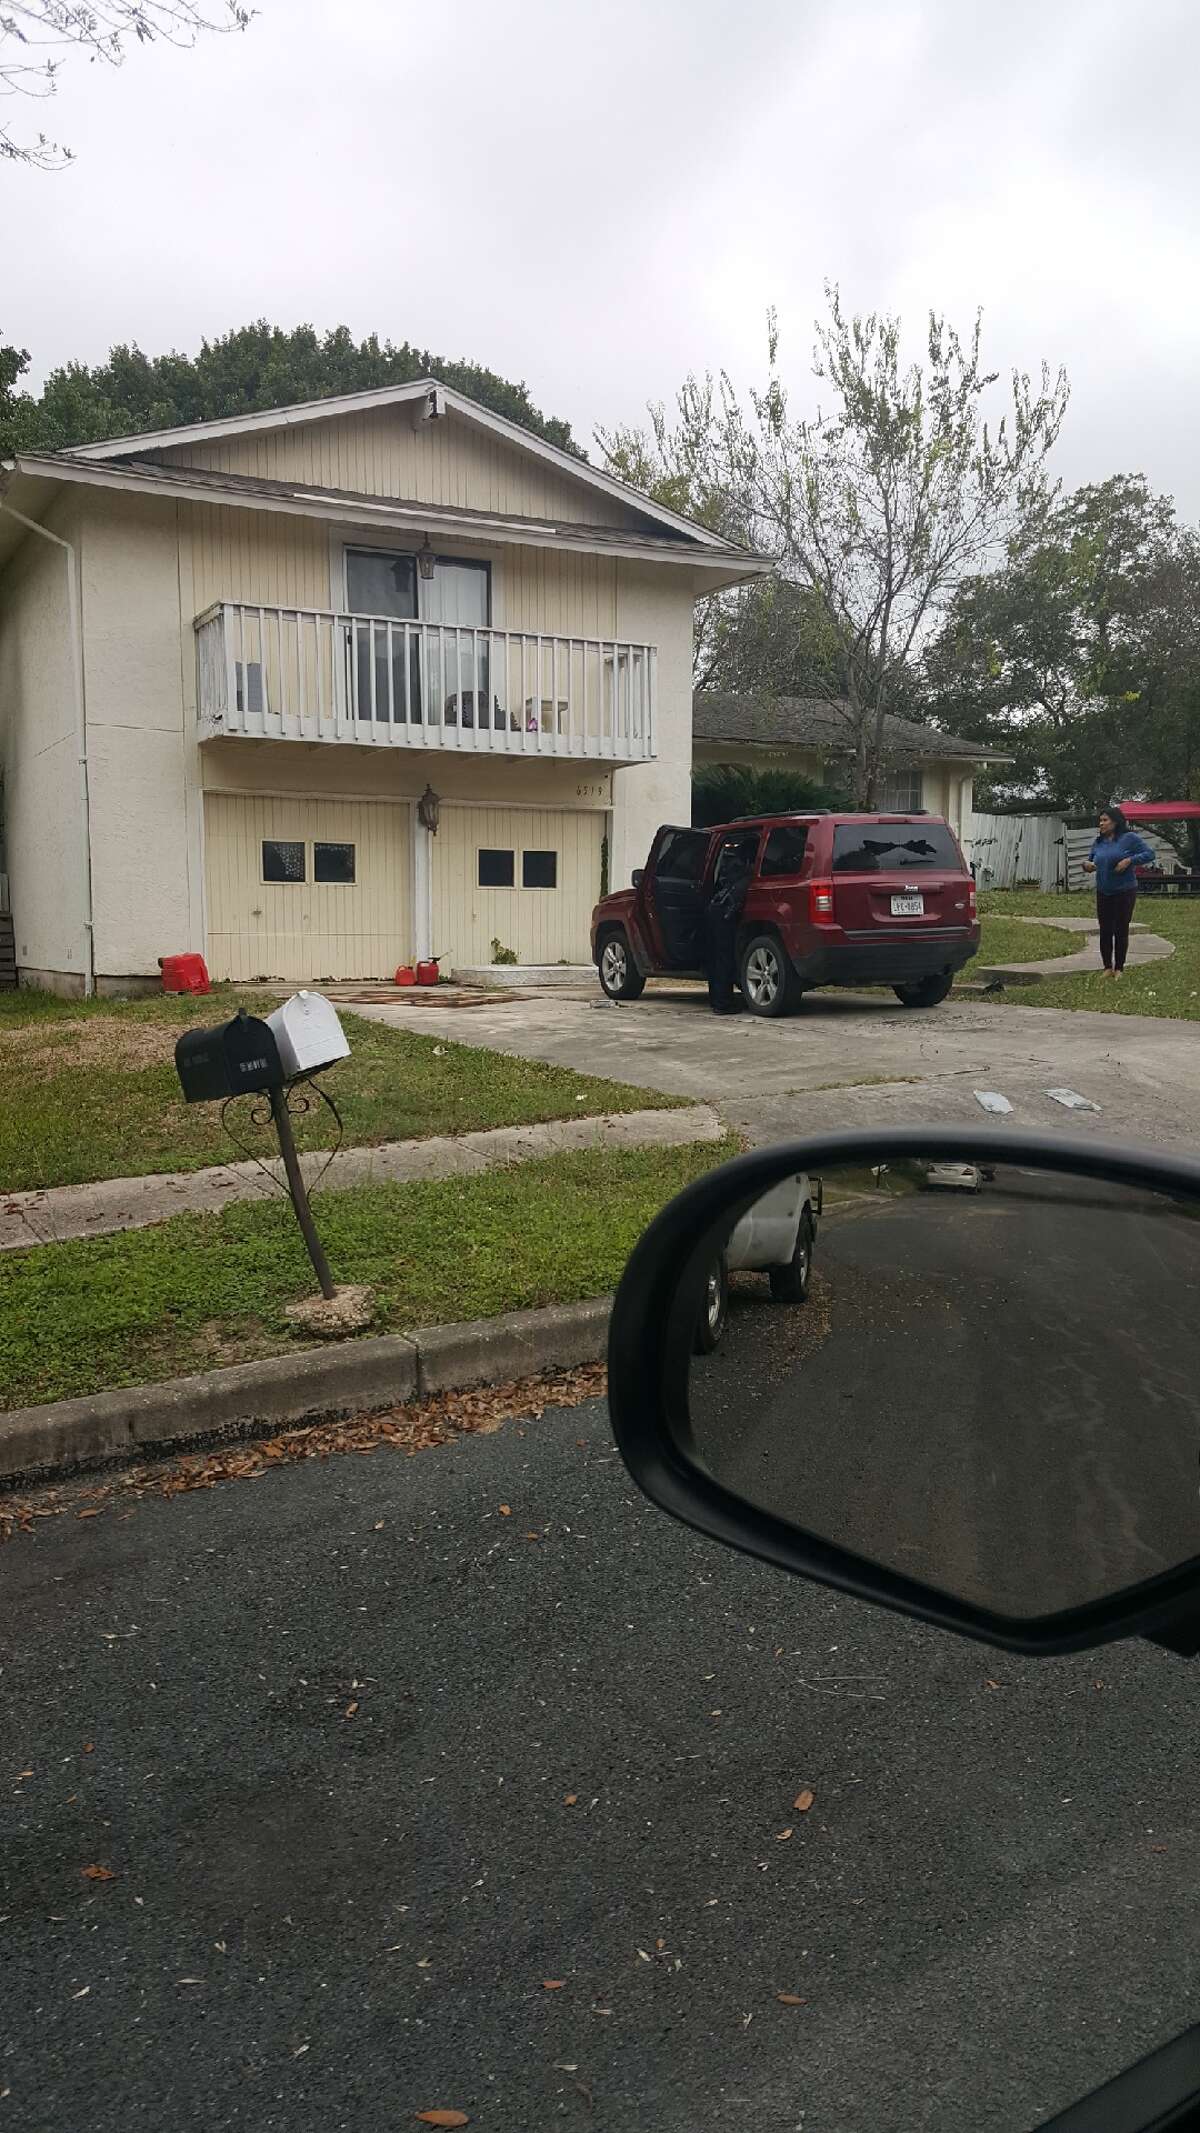 Deputies on Wednesday, Nov. 7, 2018, arrested a 64-year-old man who allegedly shot someone in the 6500 block of Waterfall Drive during an argument. Robert Perez, a neighbor, provided this photo of the scene.